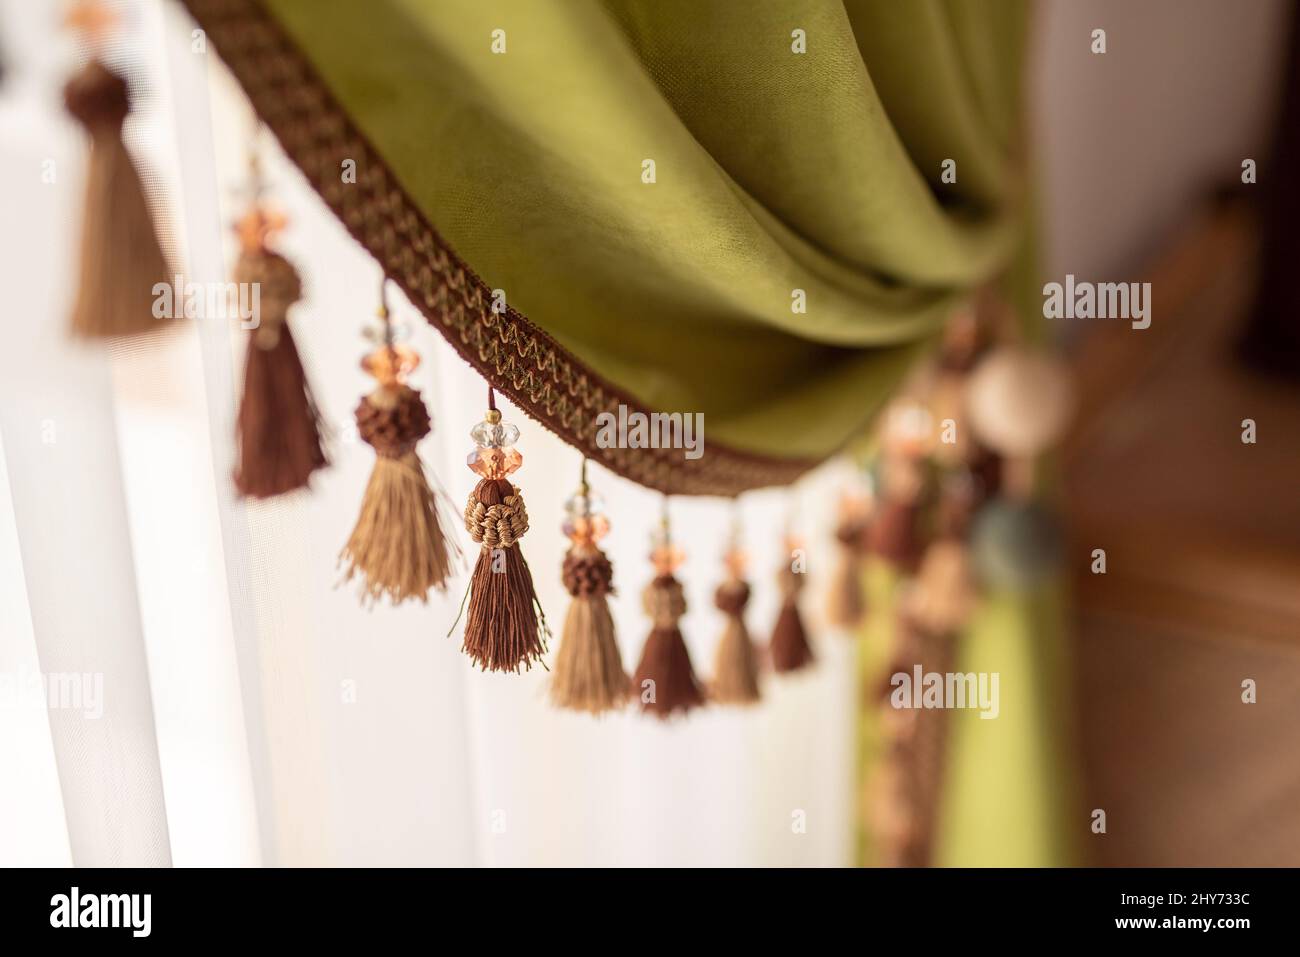 Selective focus shot of fringes of curtains Stock Photo